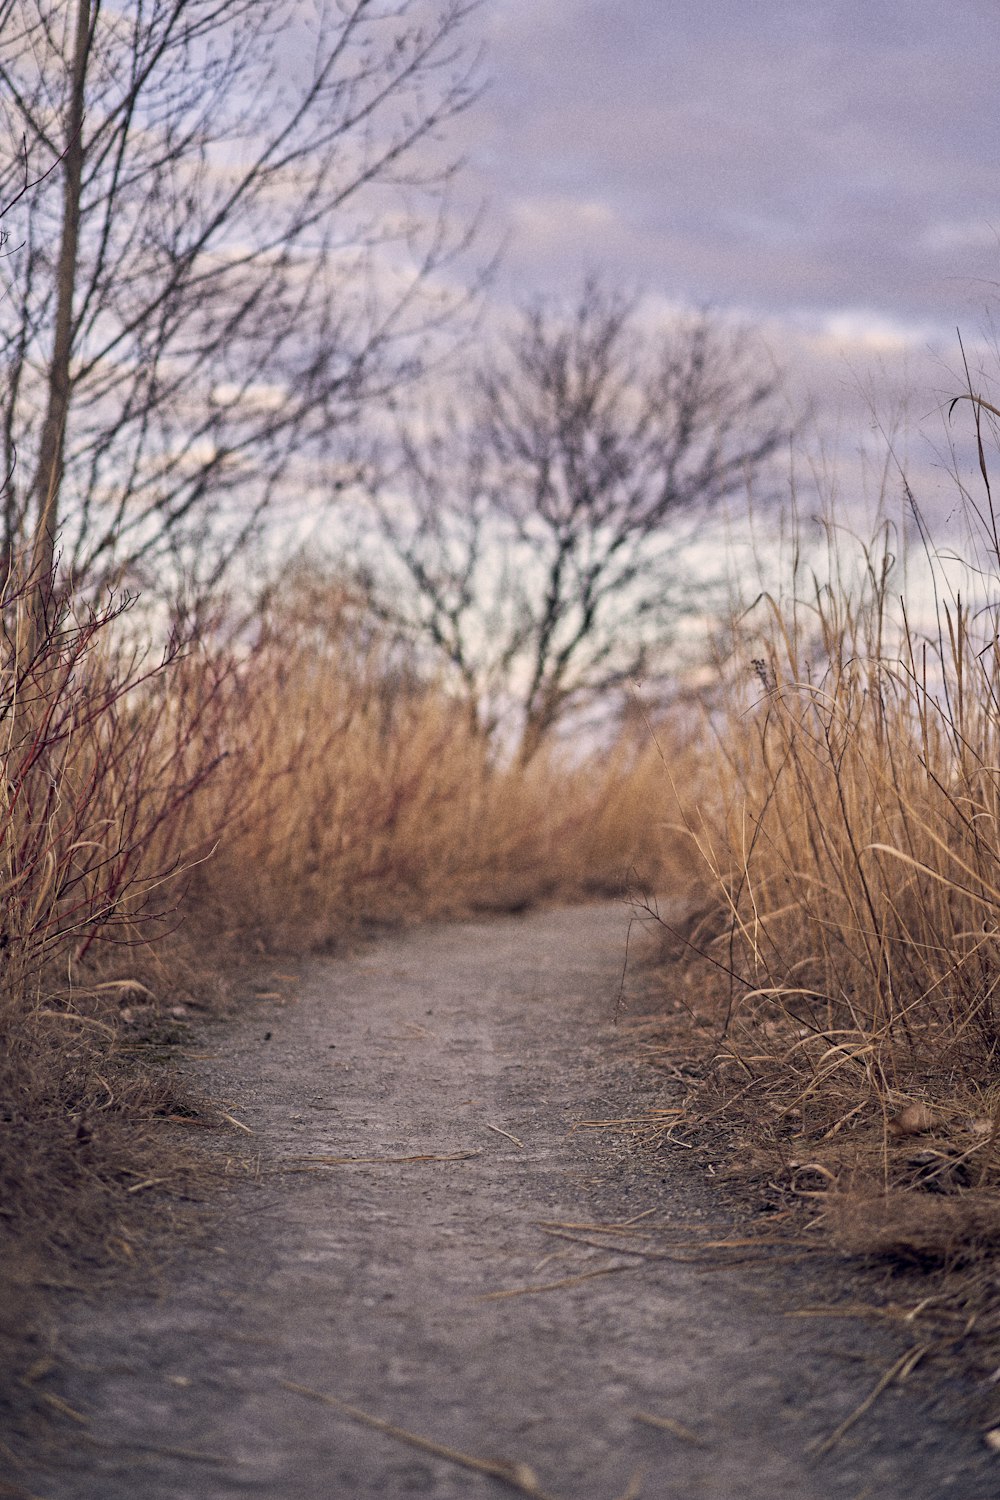 a dirt path surrounded by tall grass and bare trees